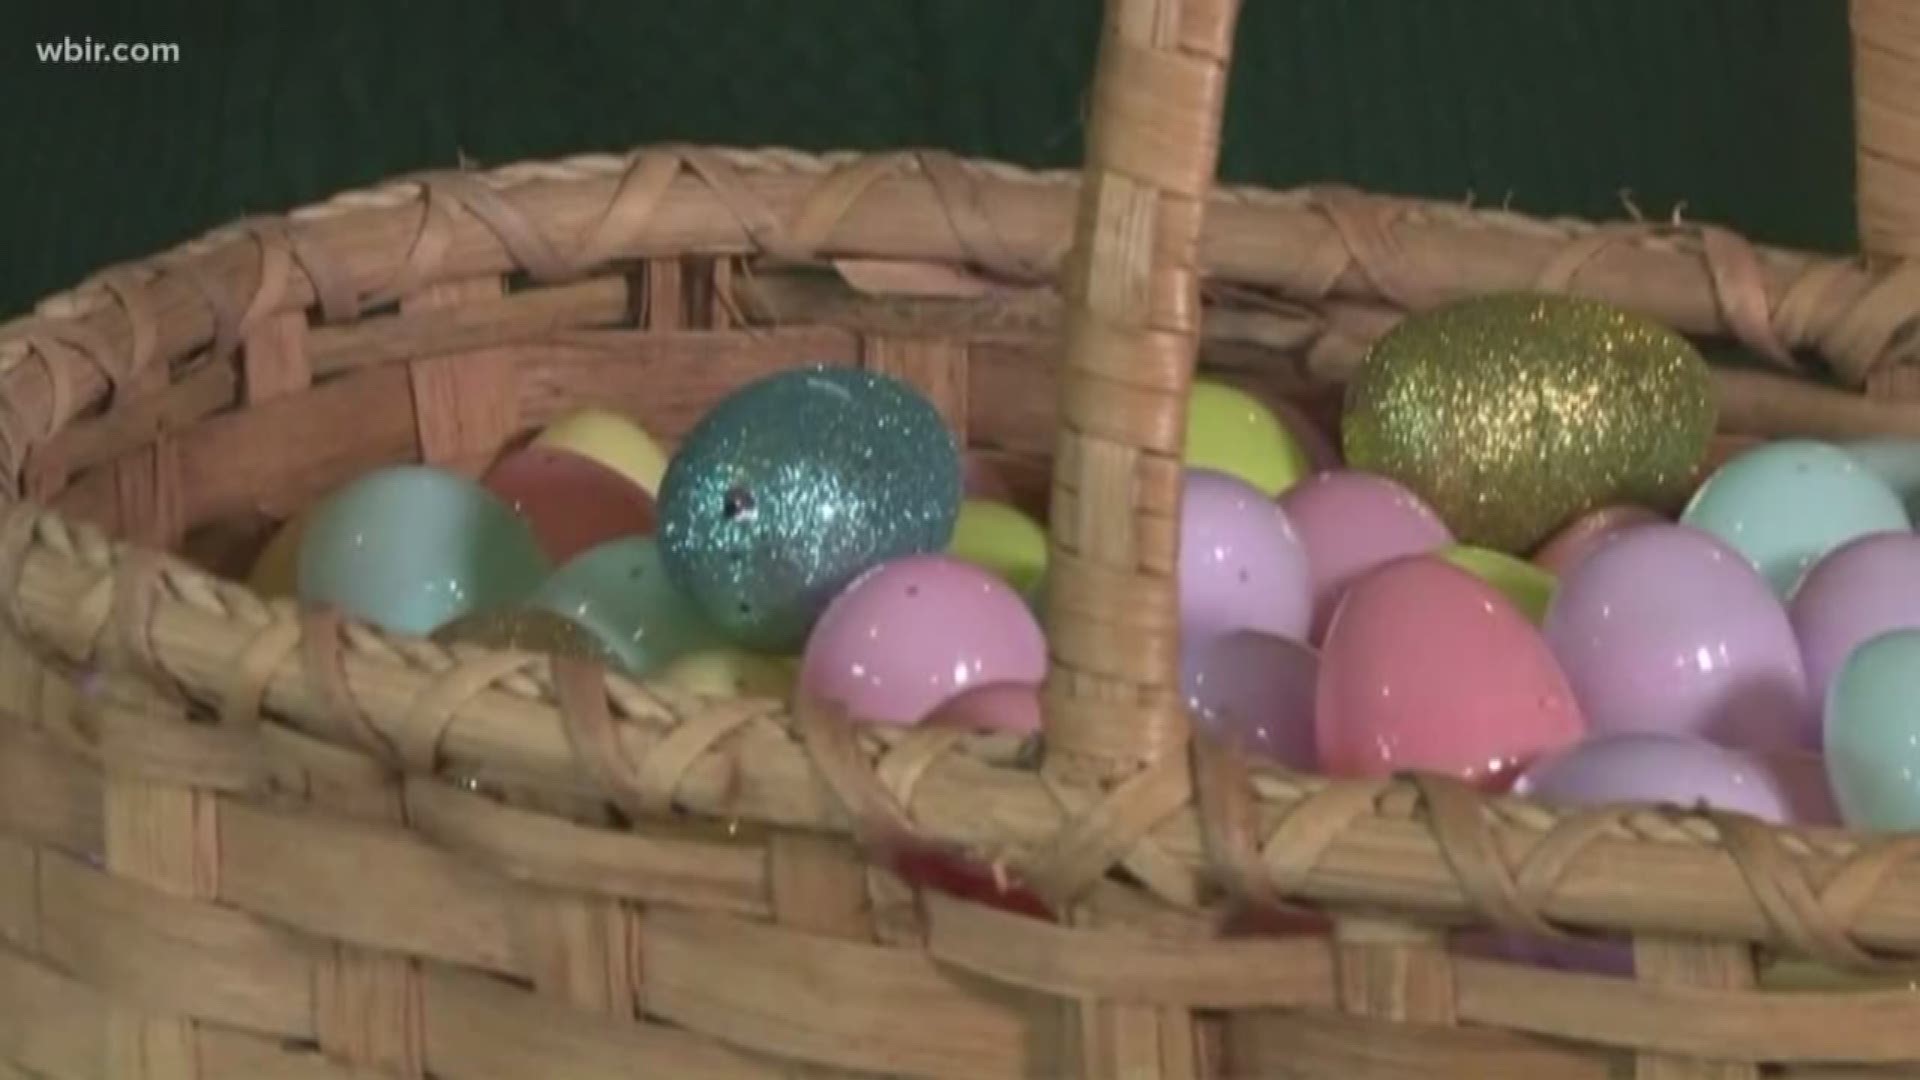 Marble Springs State Historic Site is planning its second annual Easter Egg hunt and roll for April 20.